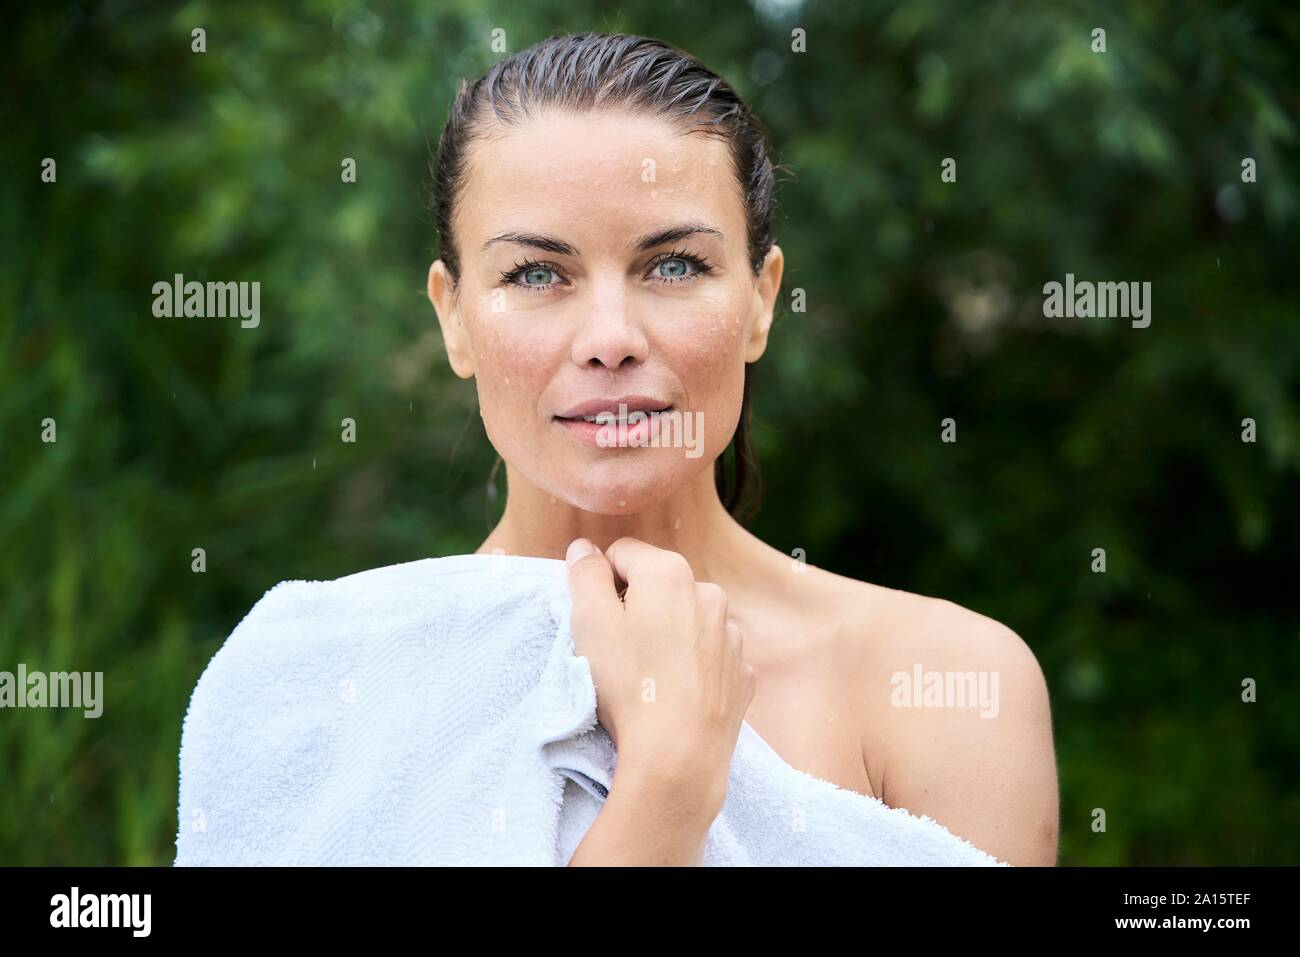 Portrait of woman with wet hair wrapped in a towel in nature Stock Photo